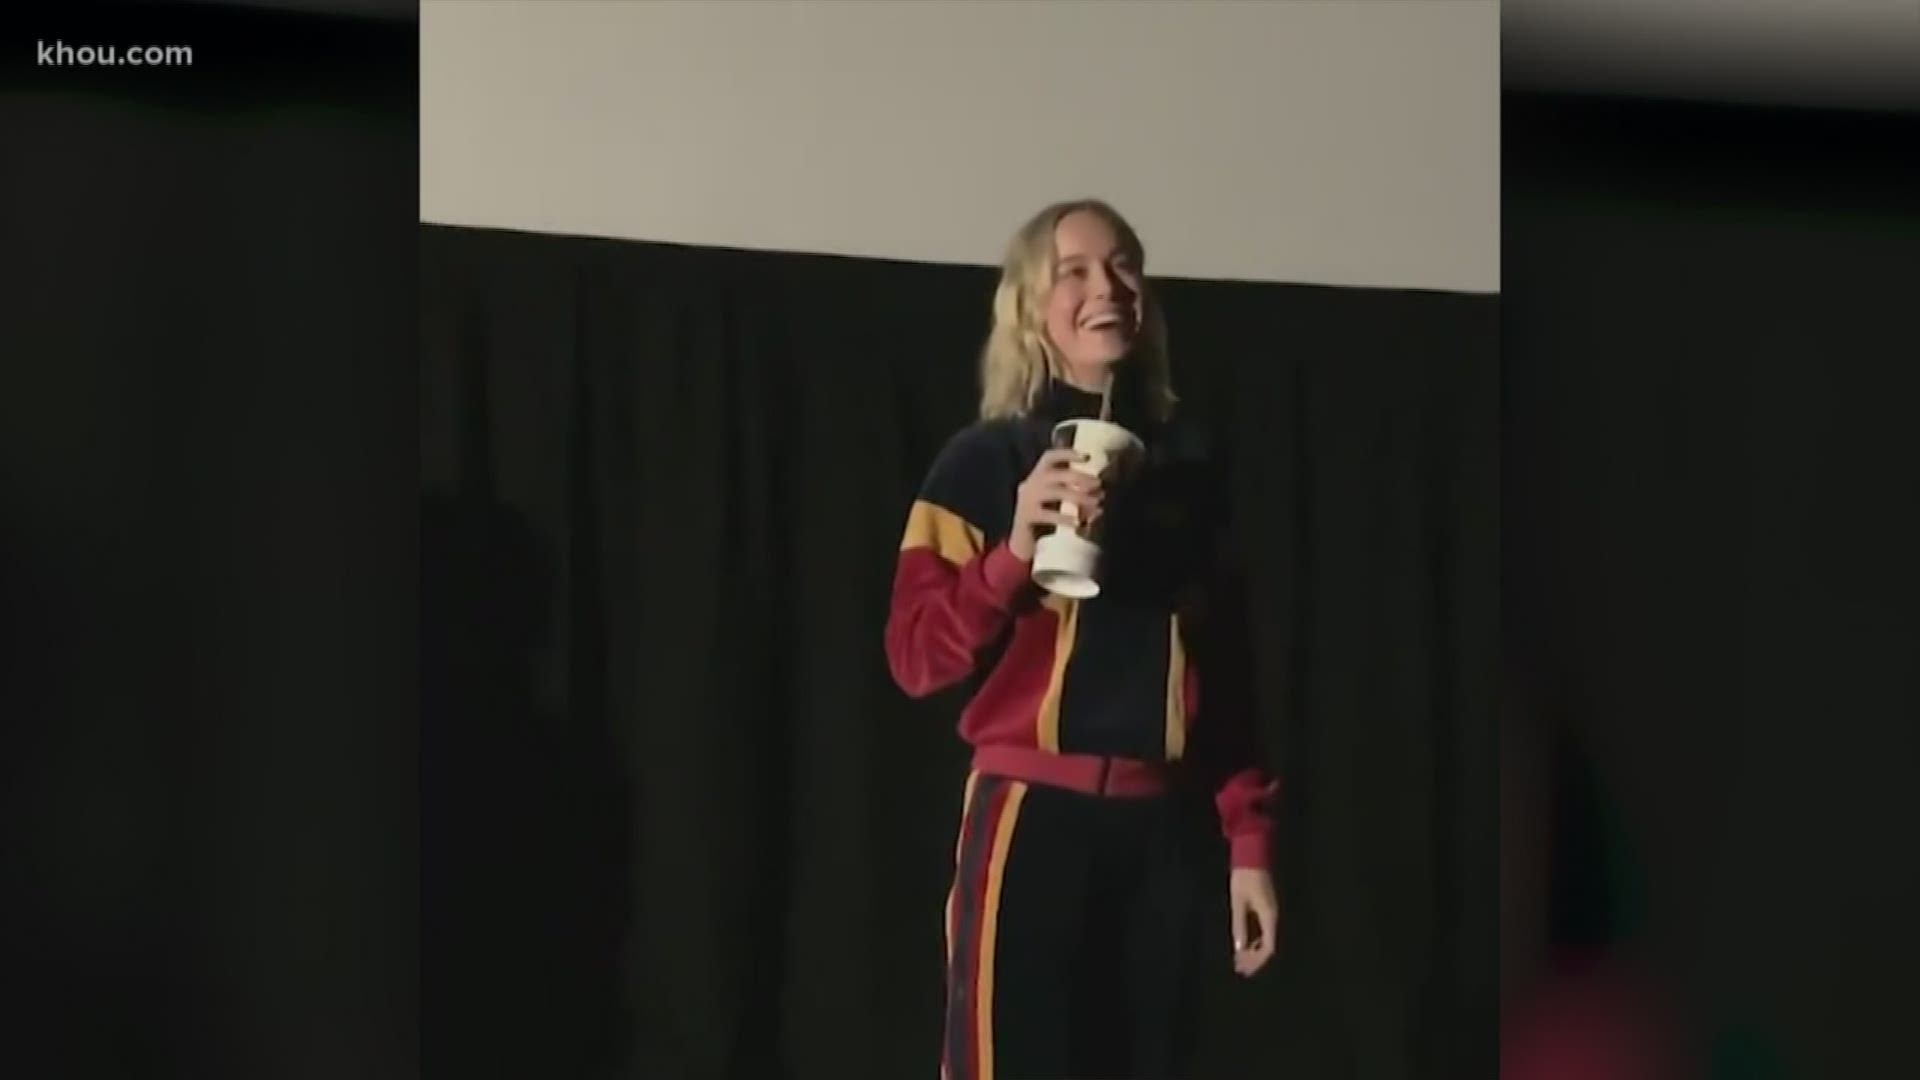 Some lucky 'Captain Marvel' audiences were in for something more than popcorn and soda during their opening weekend visit to the theater. They got a visit from the film's star, actress Brie Larson.